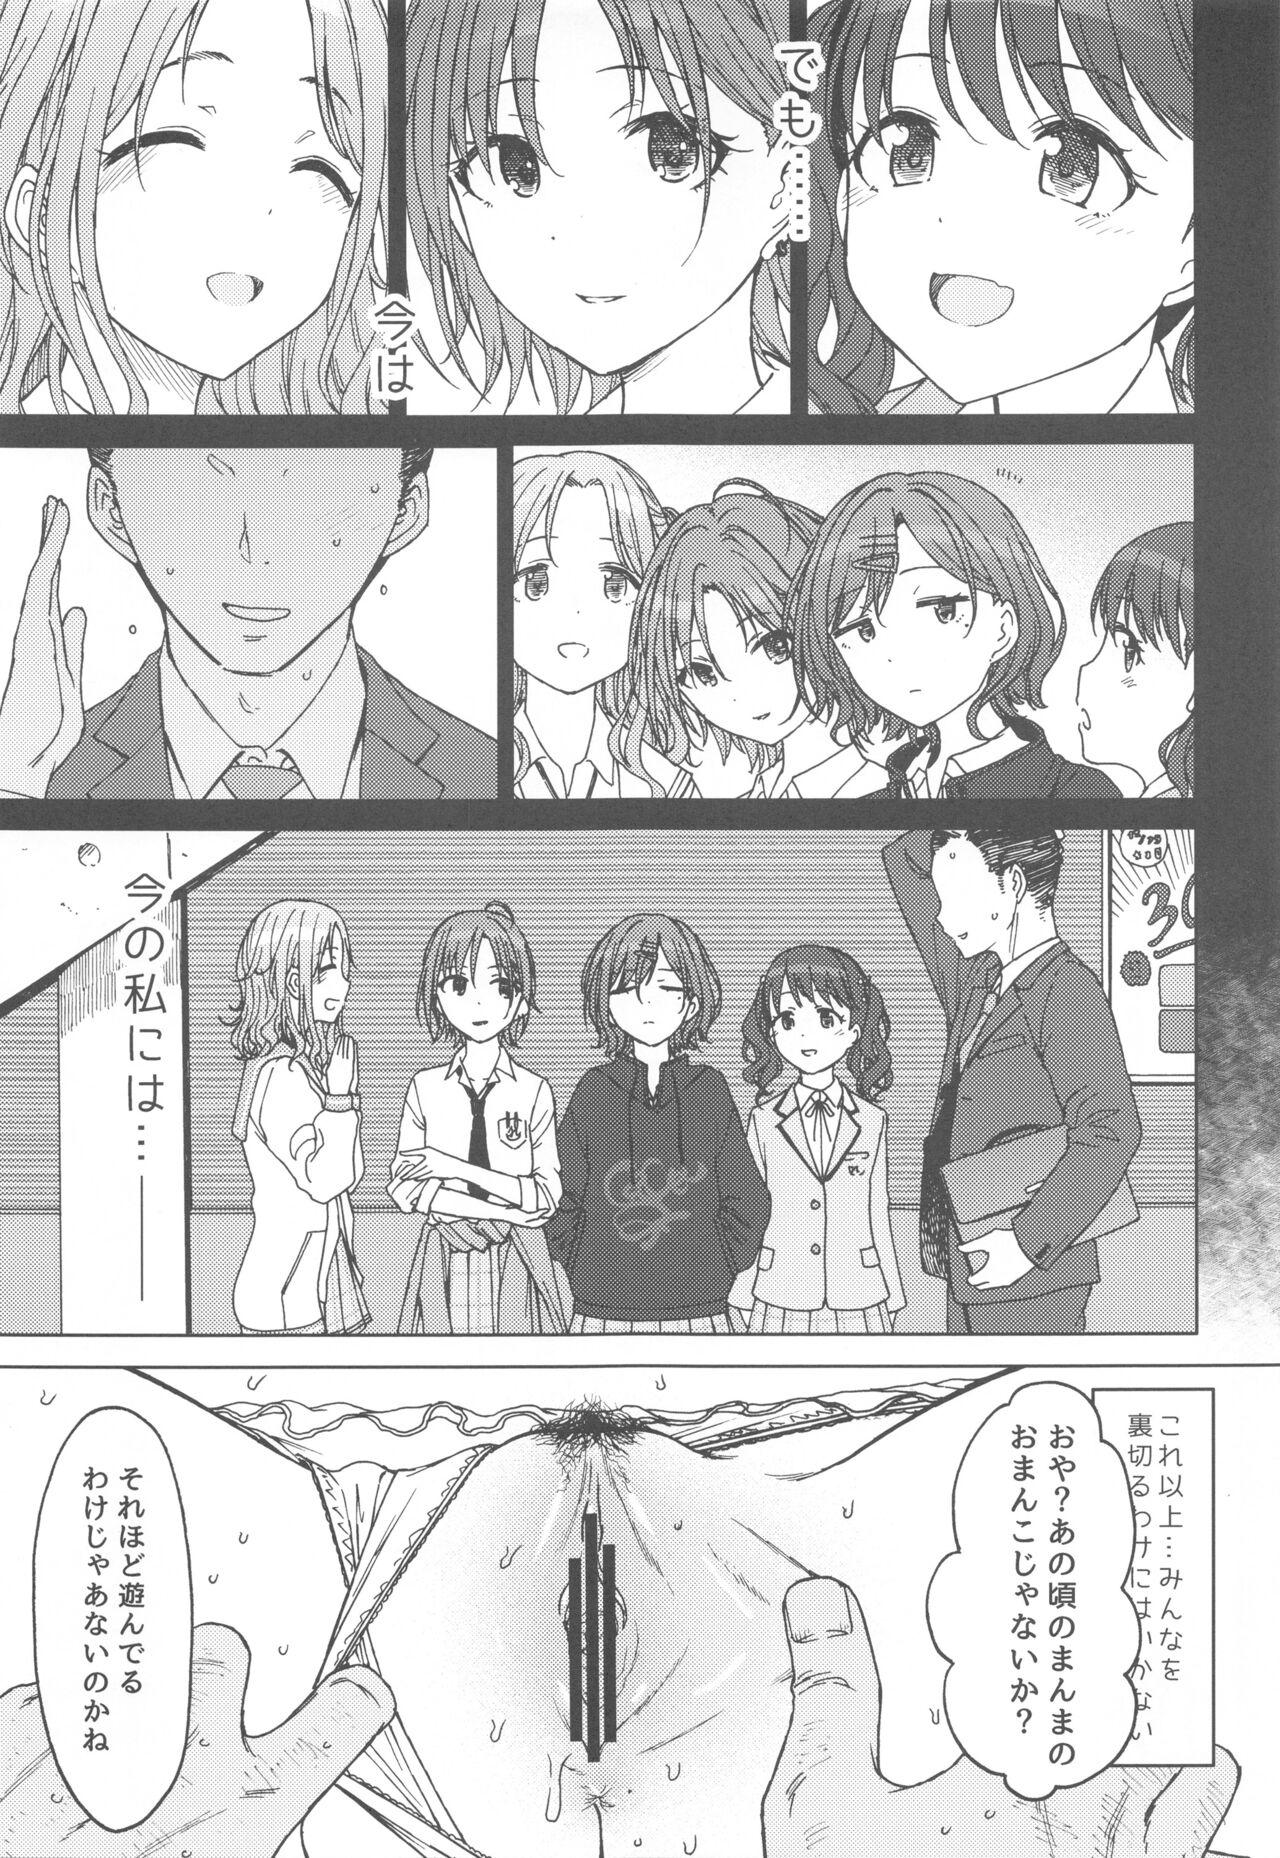 Hungarian REMIND ME - The idolmaster Lick - Page 10